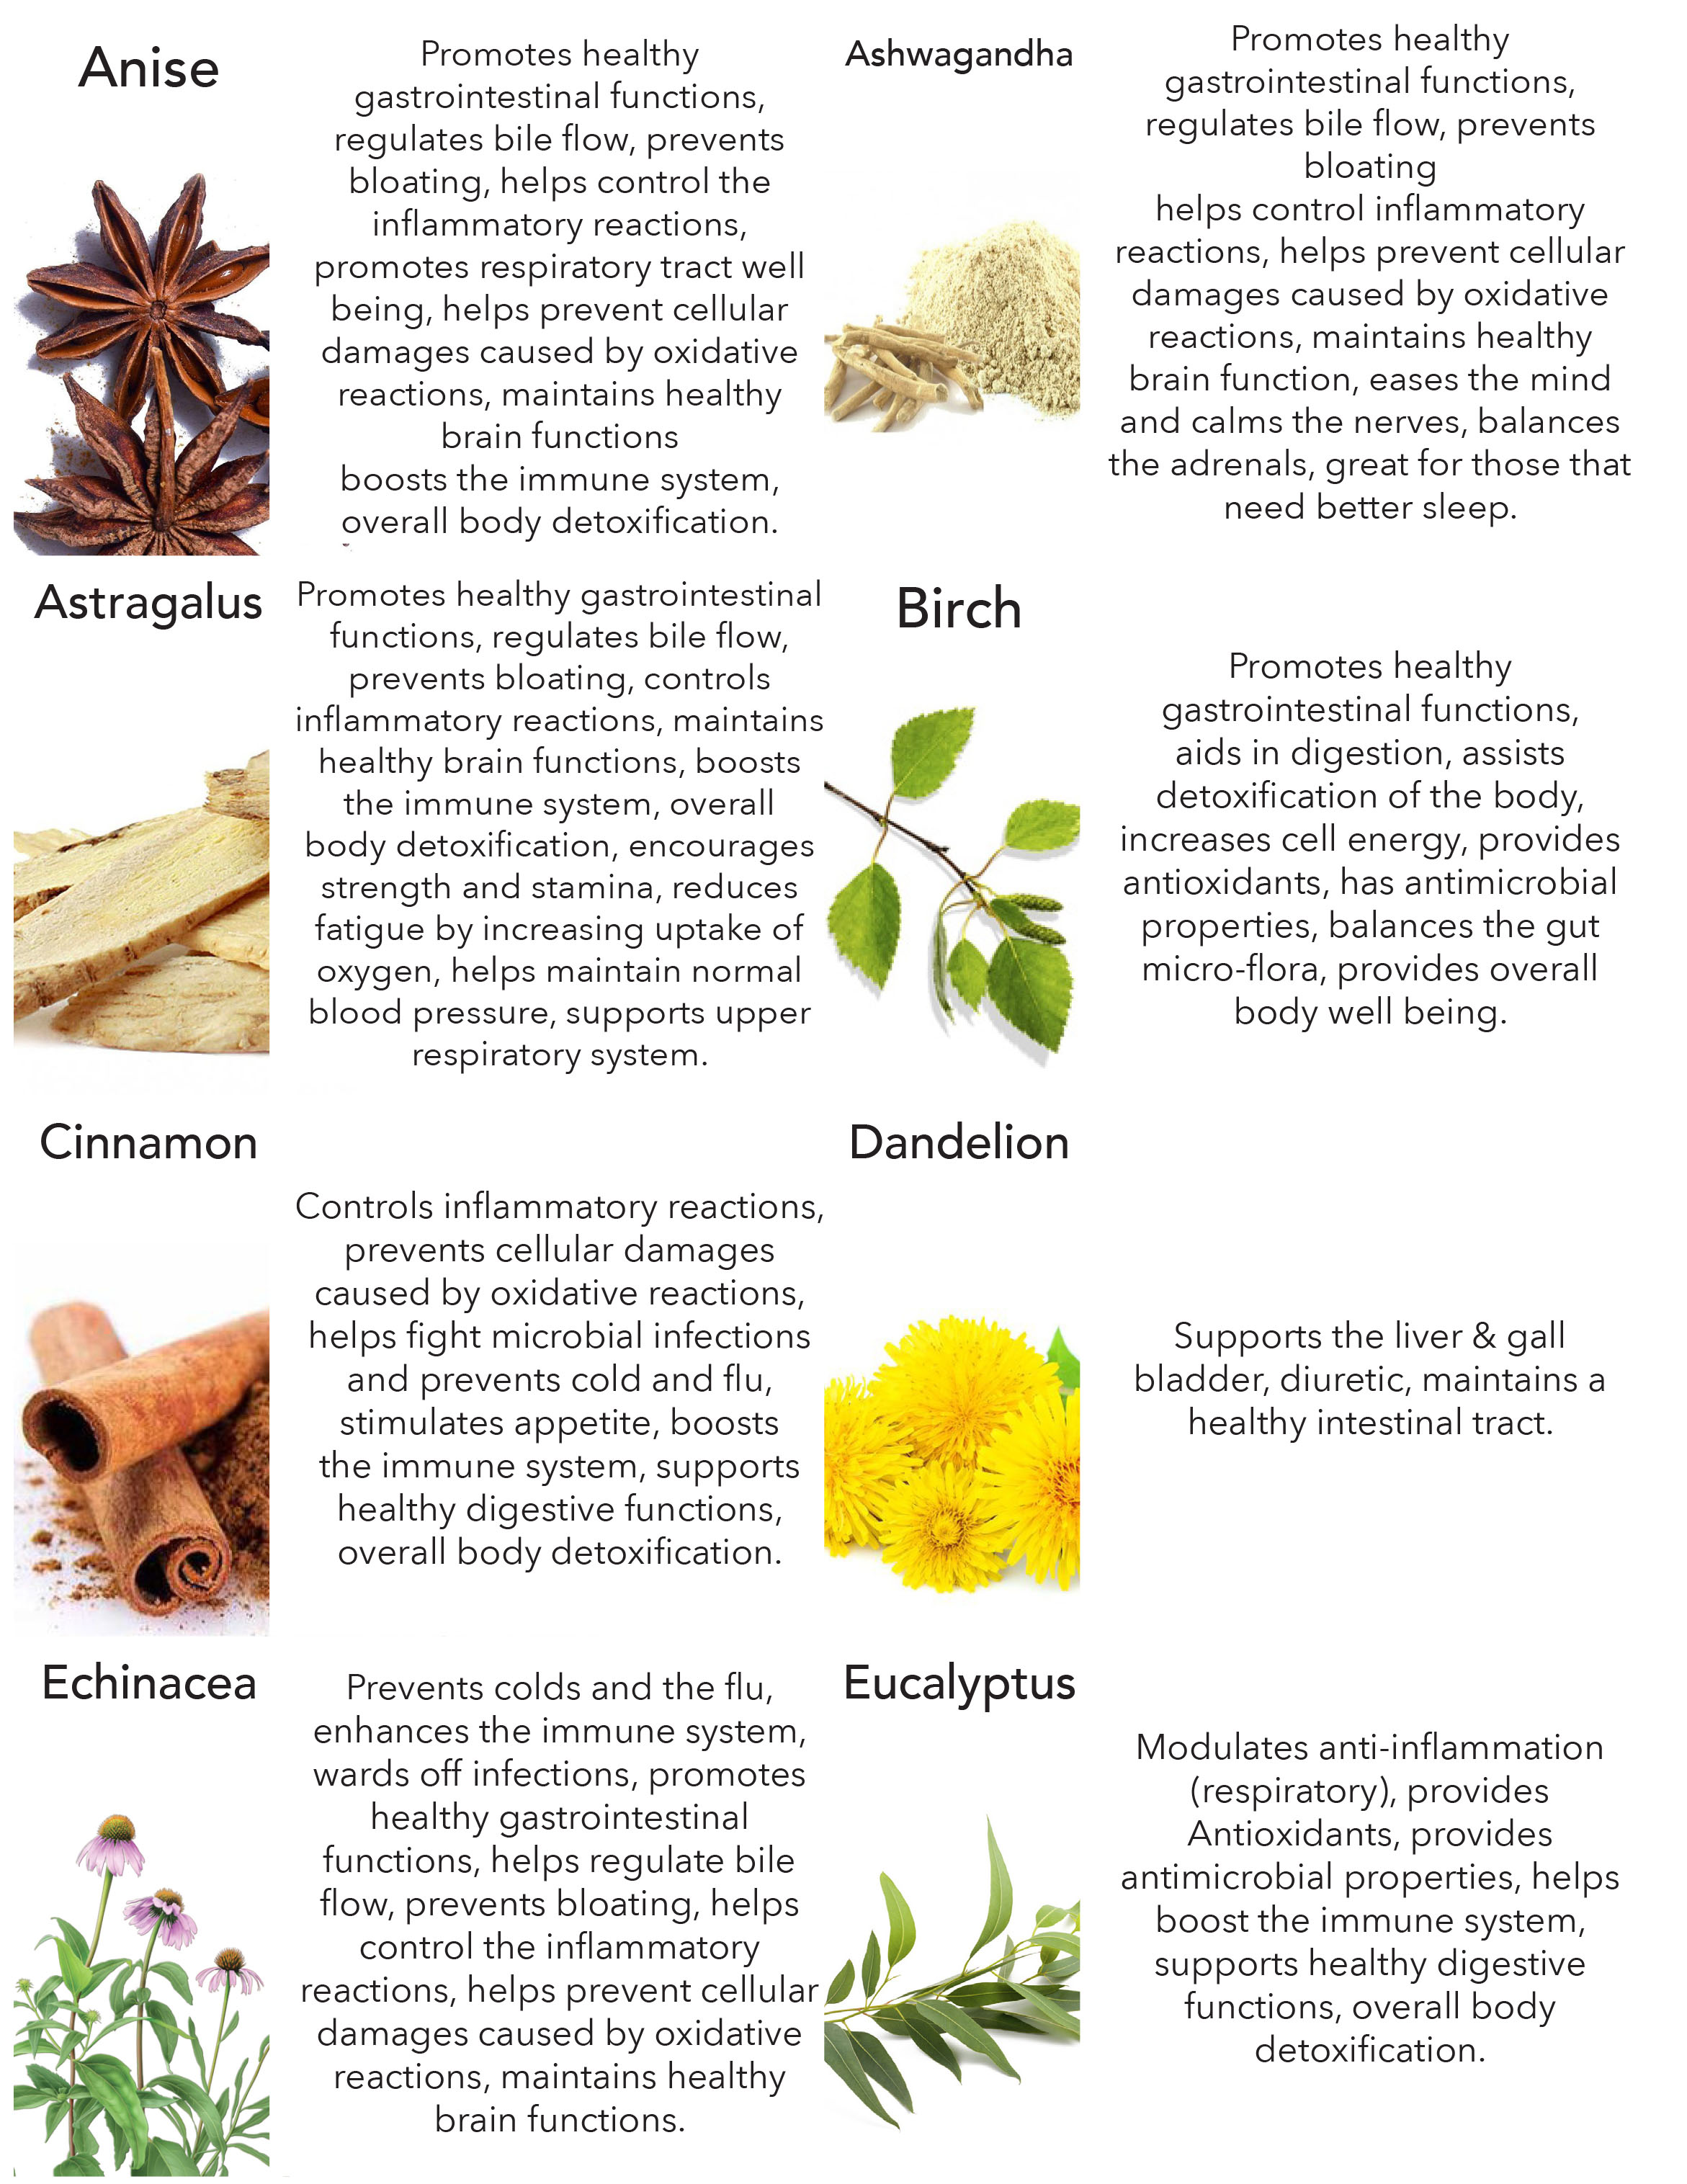 Benefits of Fermented Herbs on health